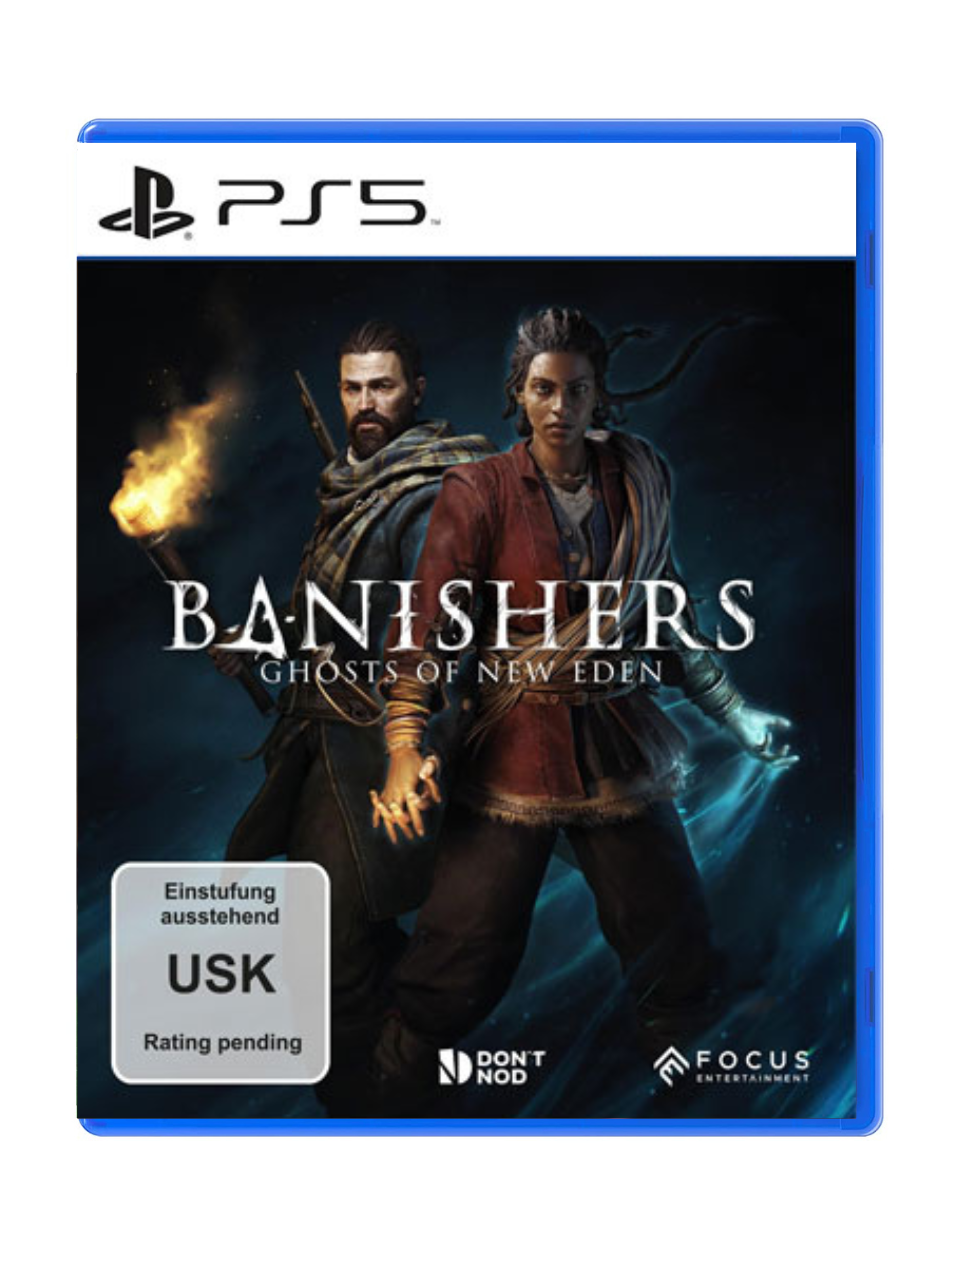 Banishers: Ghosts of New Eden - PlayStation 5/PS5